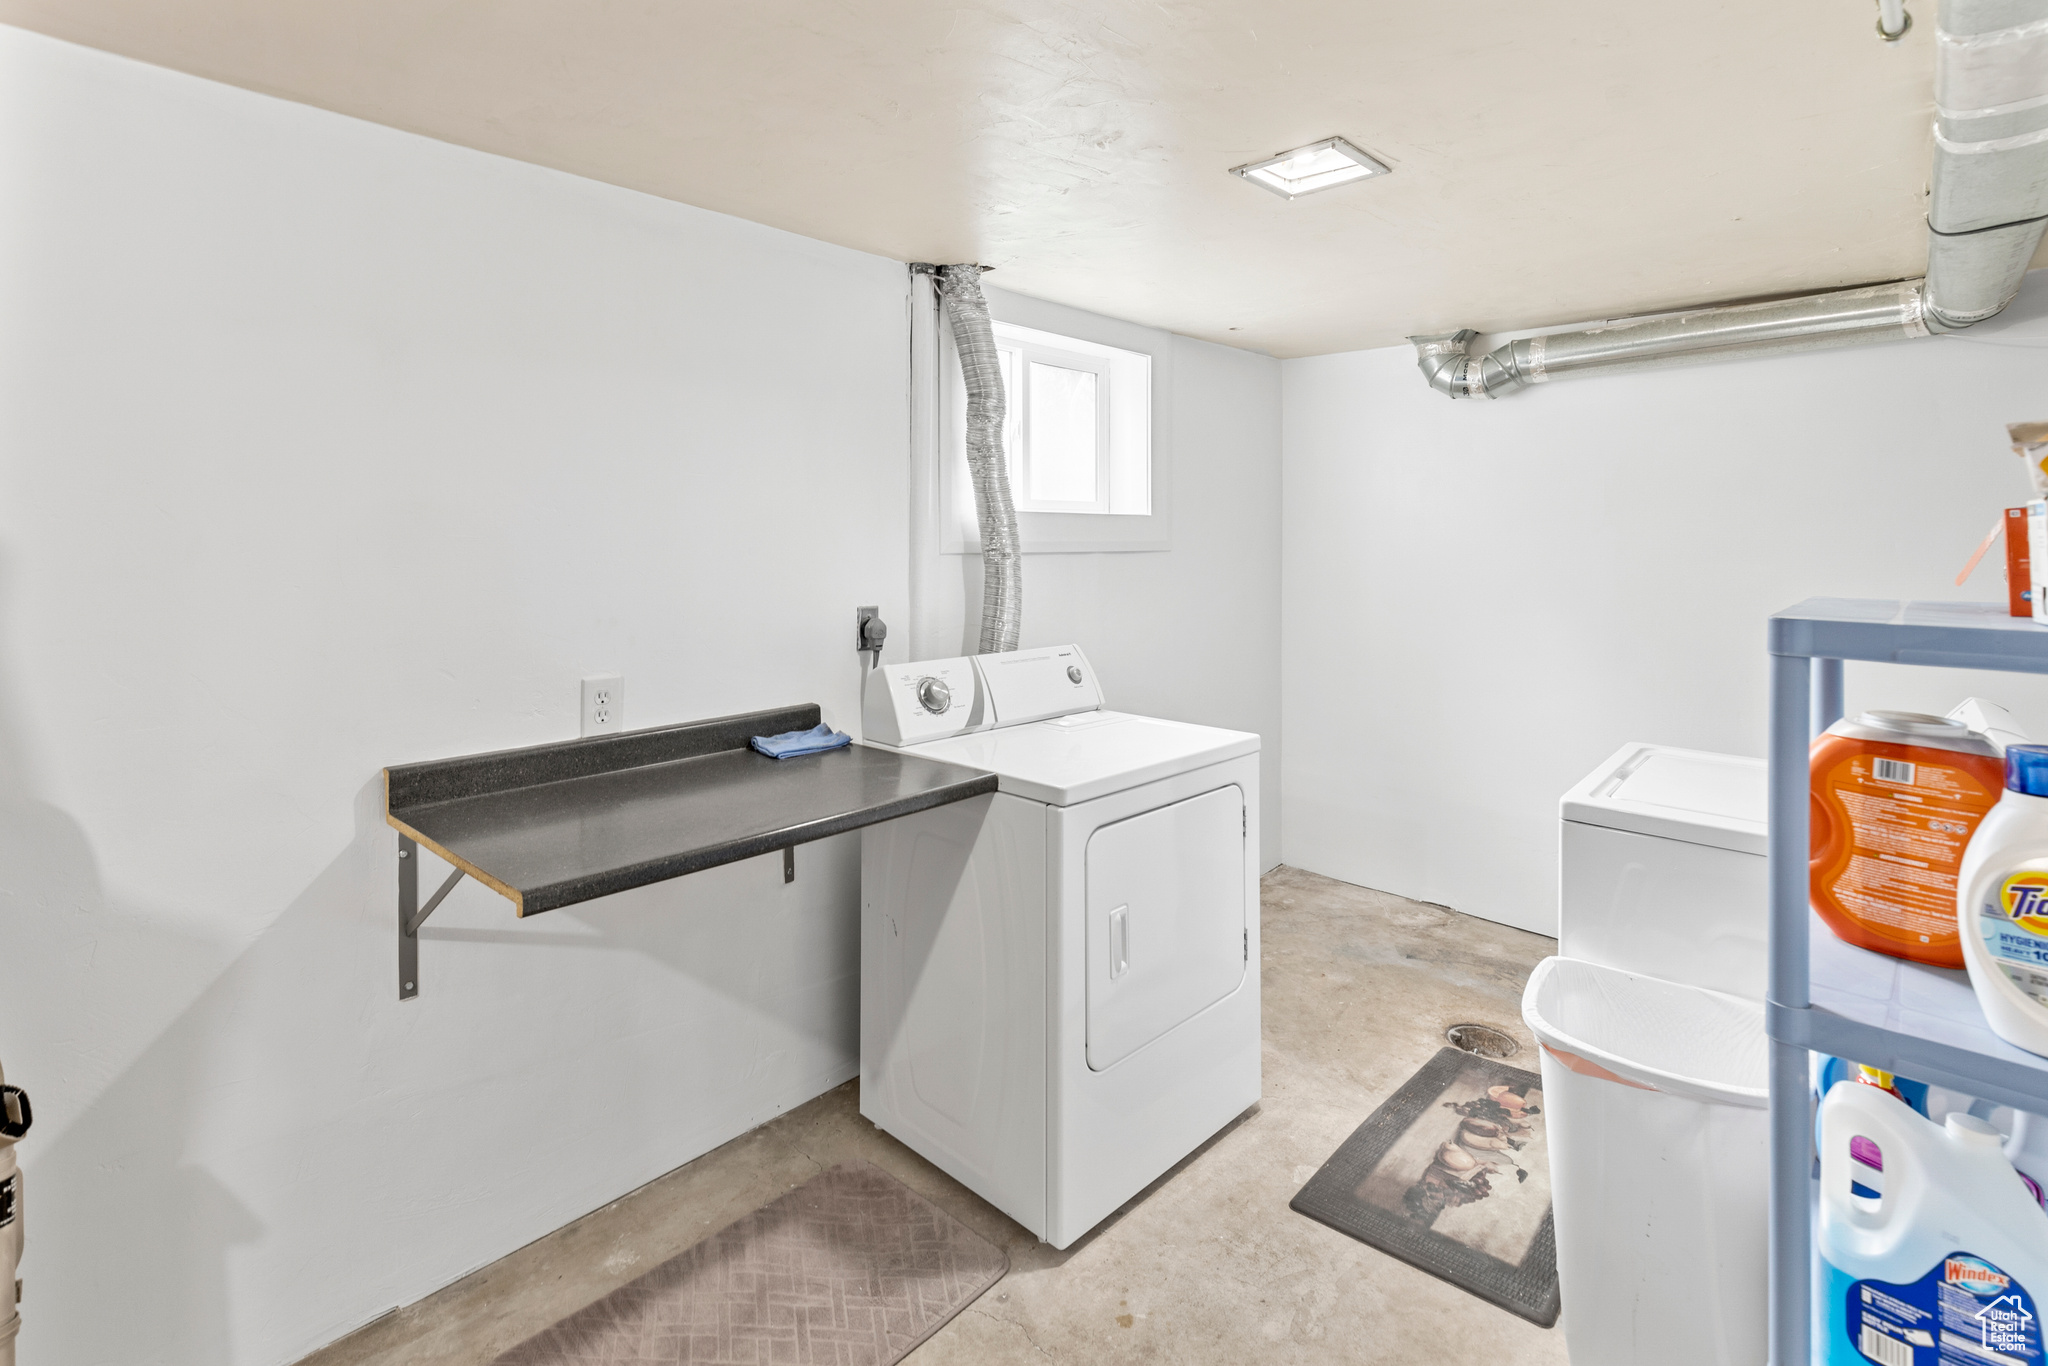 Washroom with independent washer and dryer and electric dryer hookup